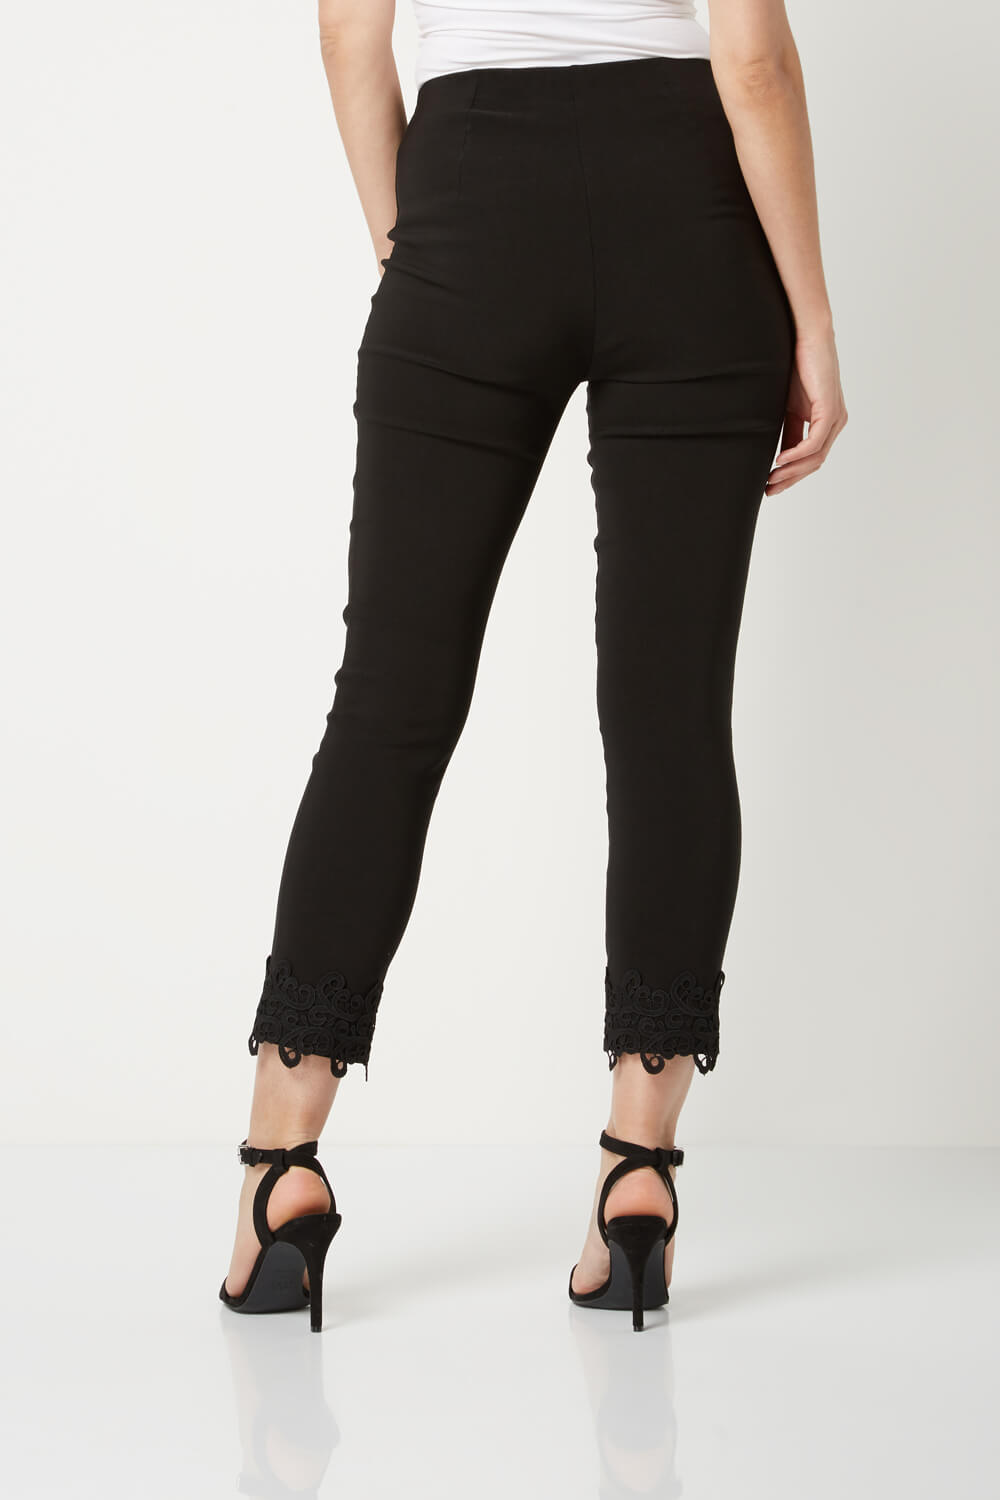 Black Cropped Stretch Trousers with Lace Hem, Image 2 of 5